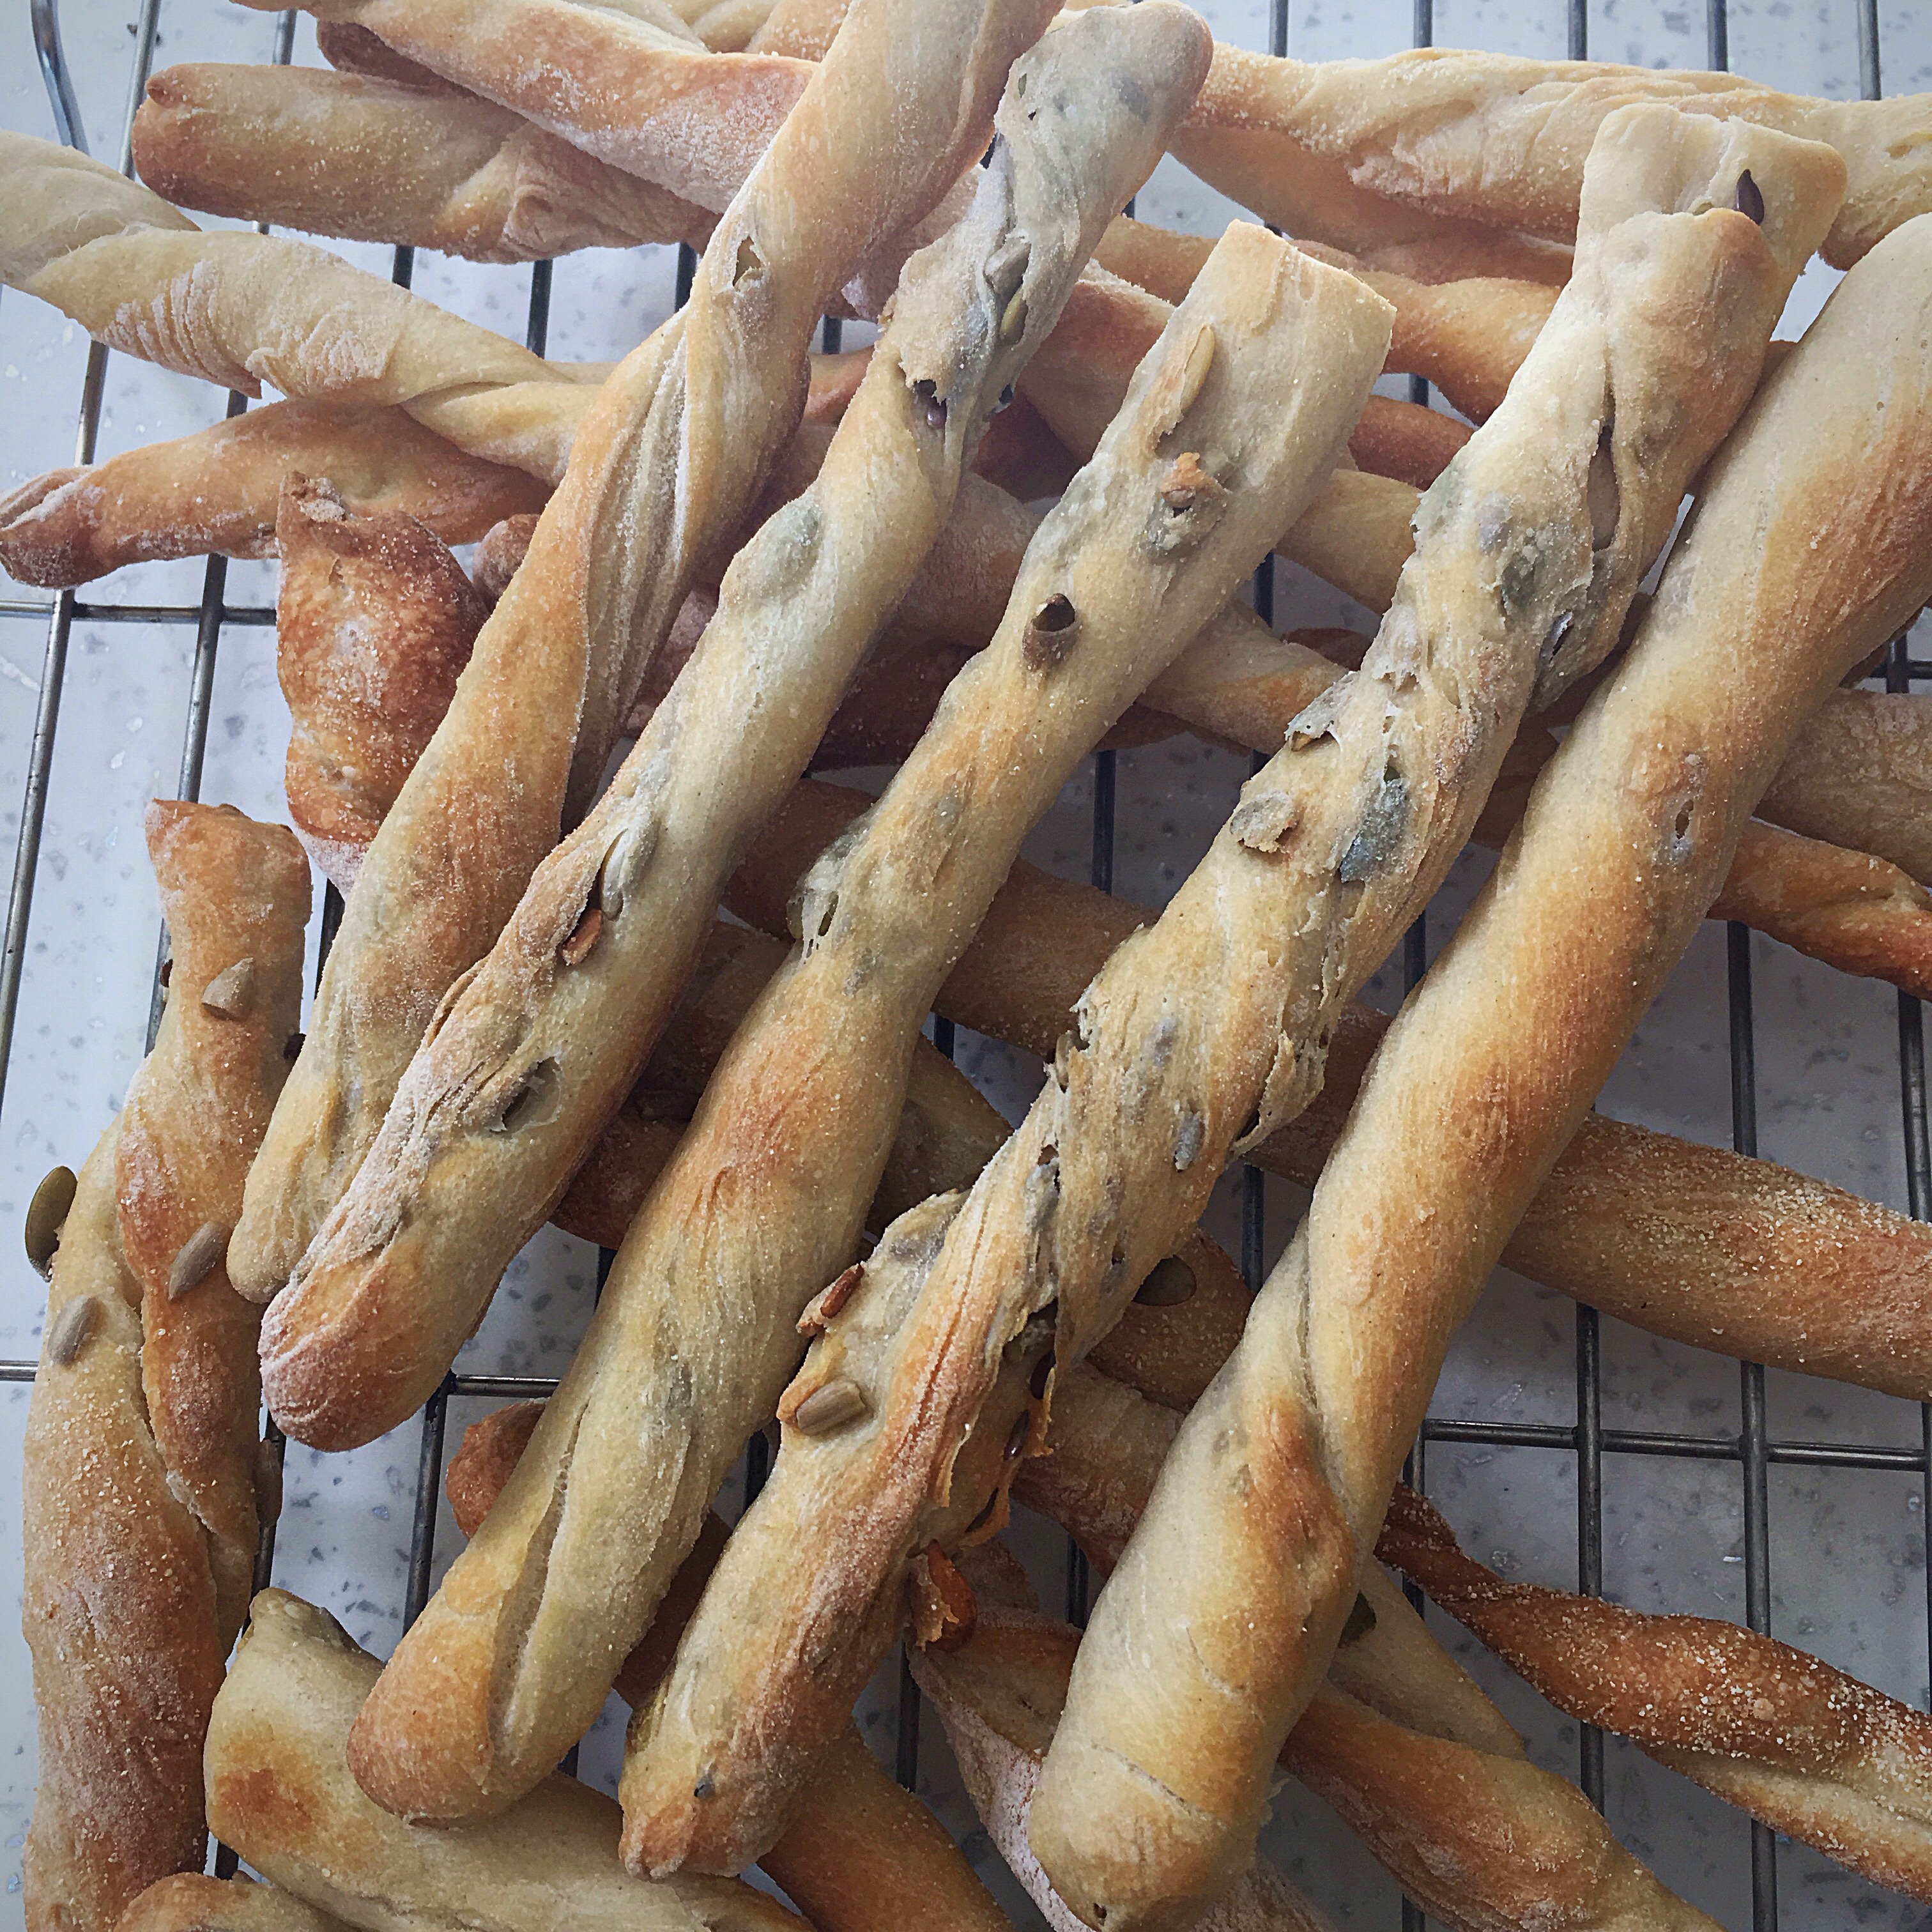 A bunch of bread sticks on a cooling rack